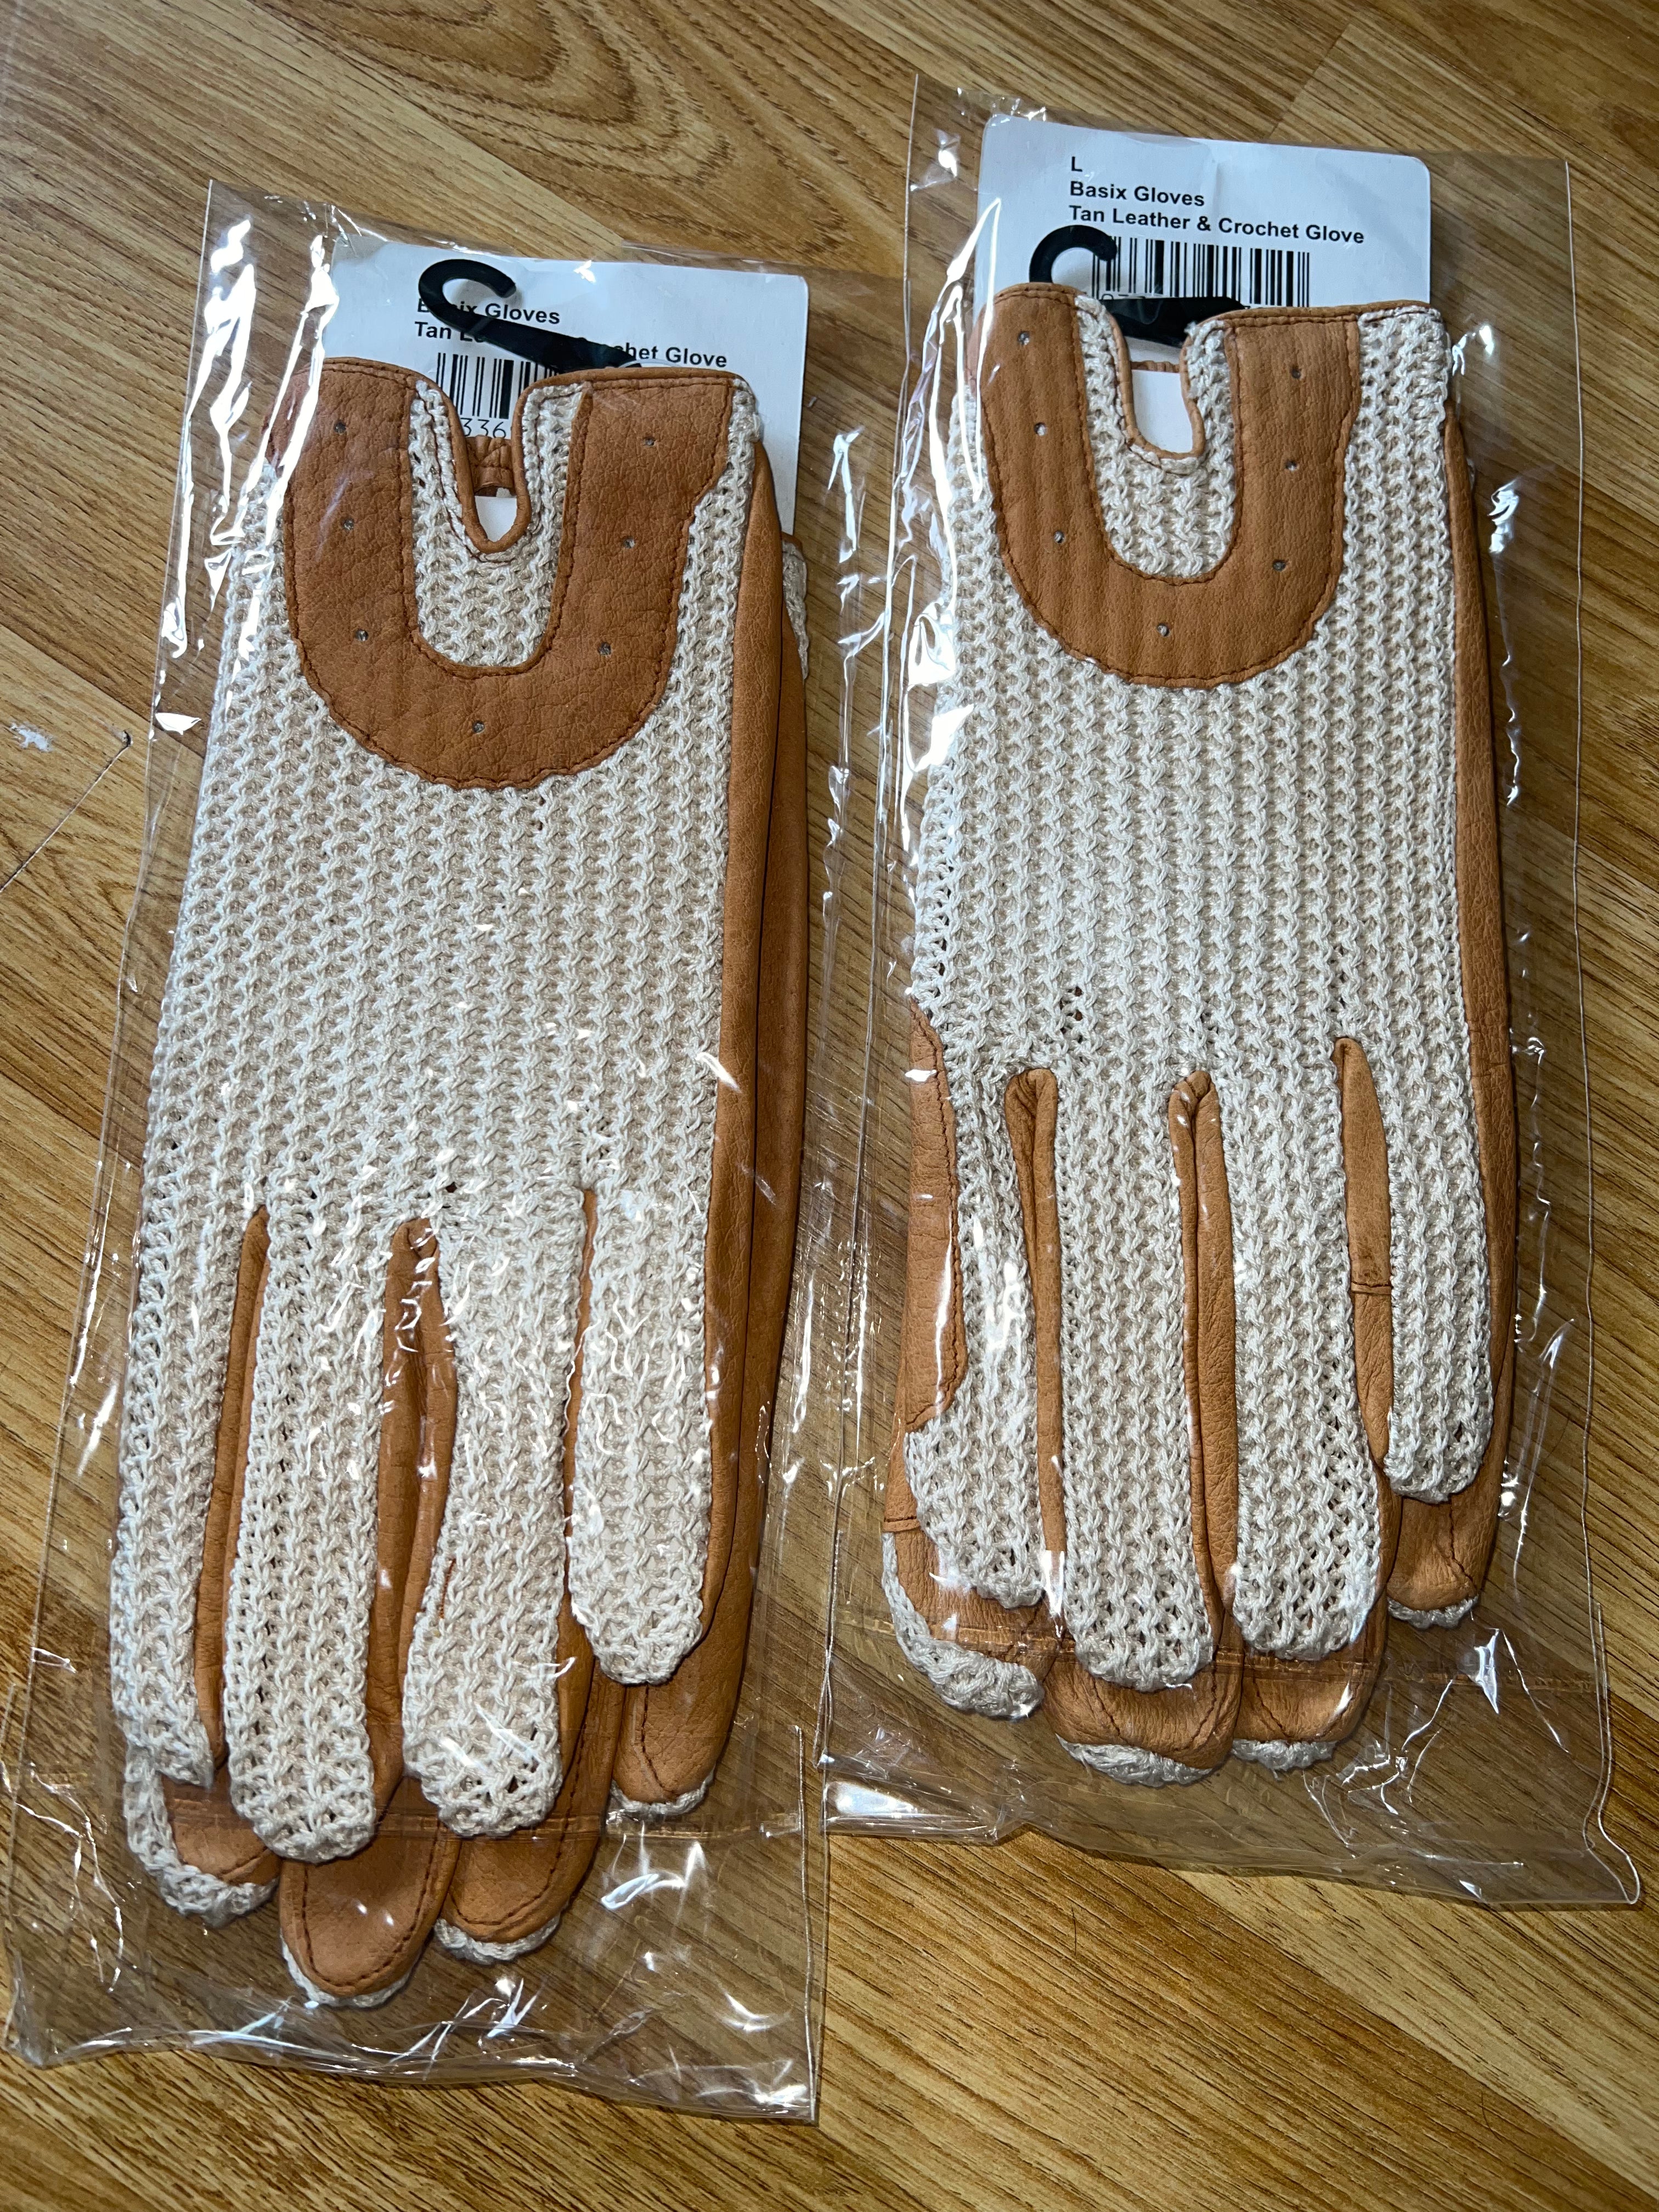 Classic Tan & Crochet Riding Gloves - Large or X-LARGE